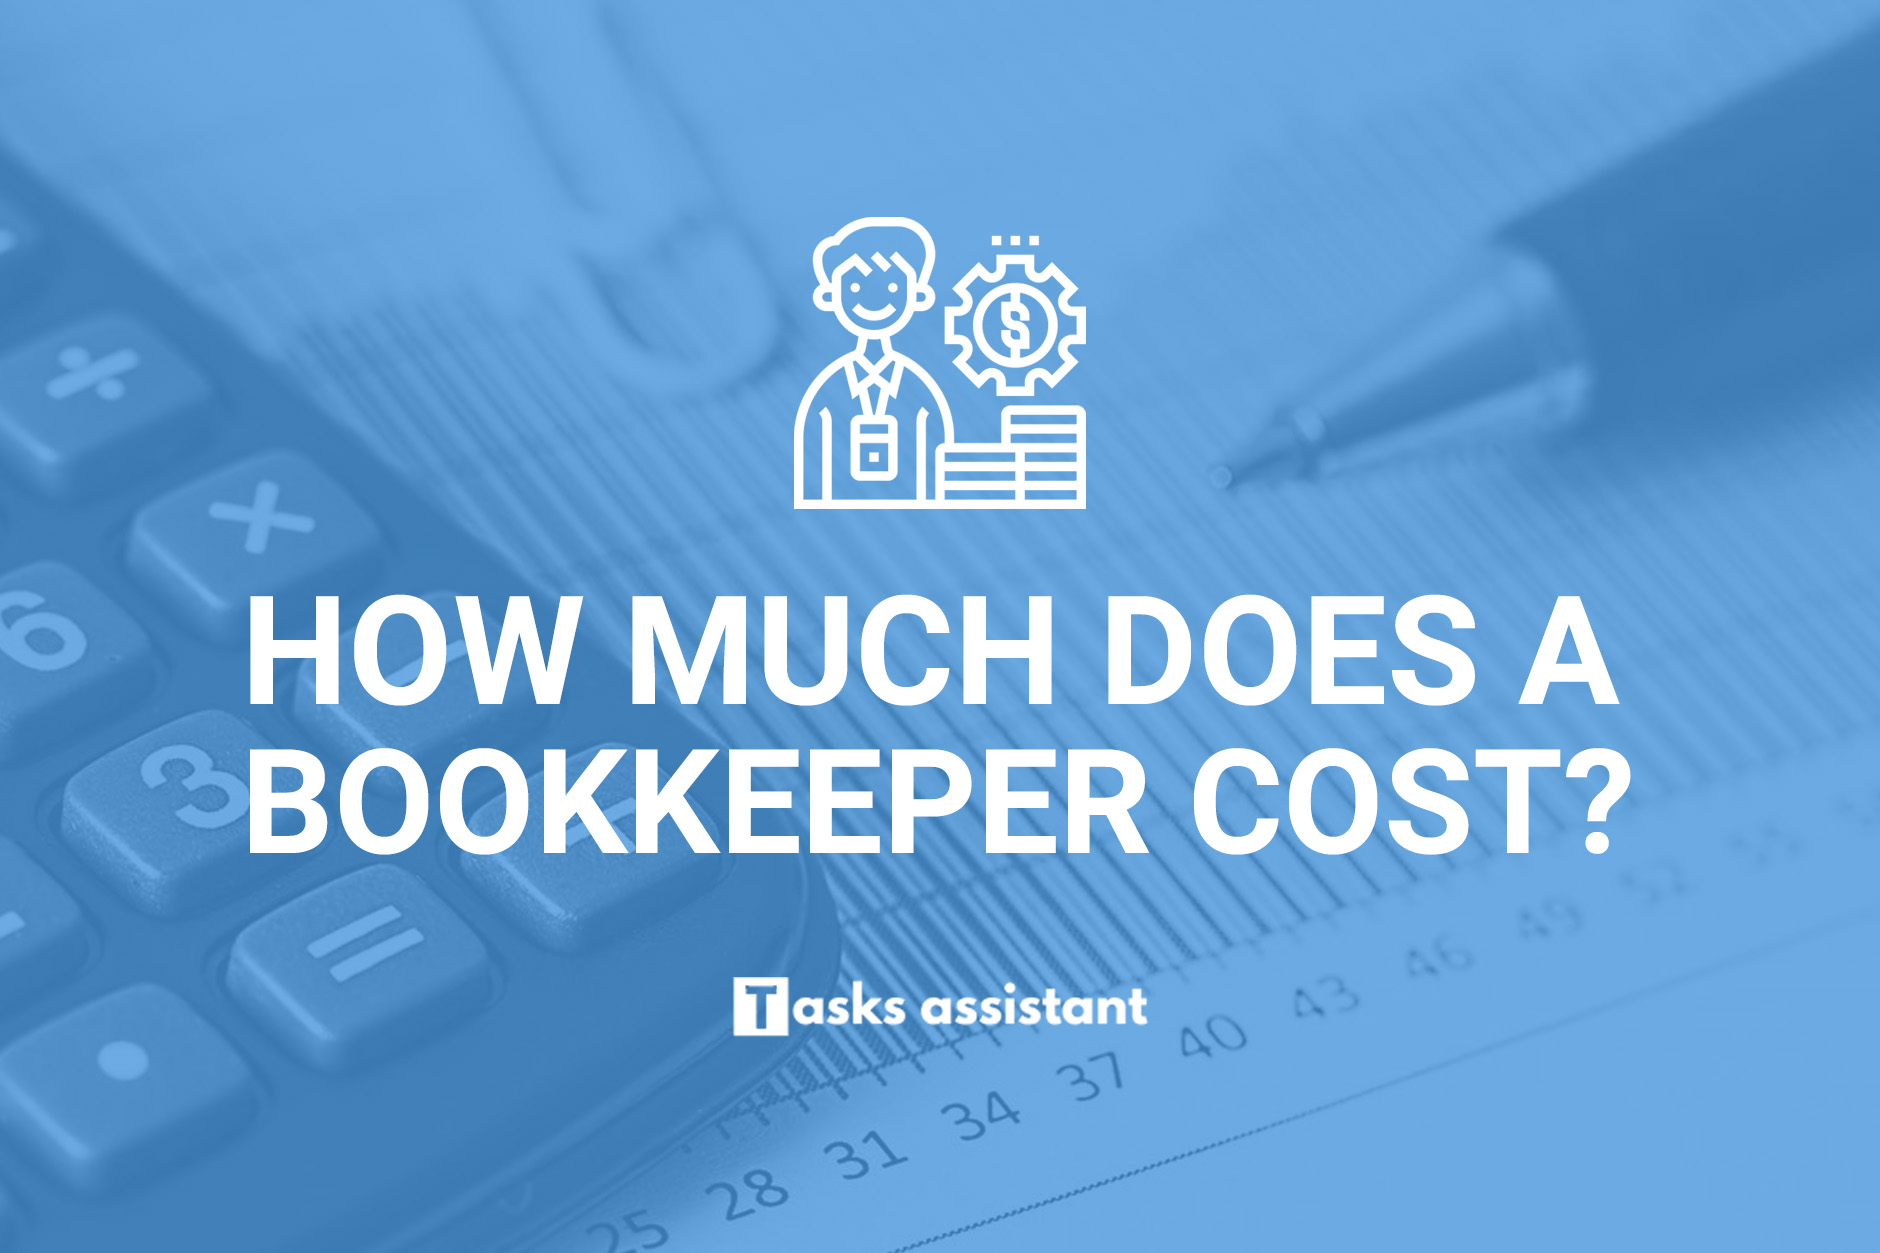 Bookkeeper Annual Salary